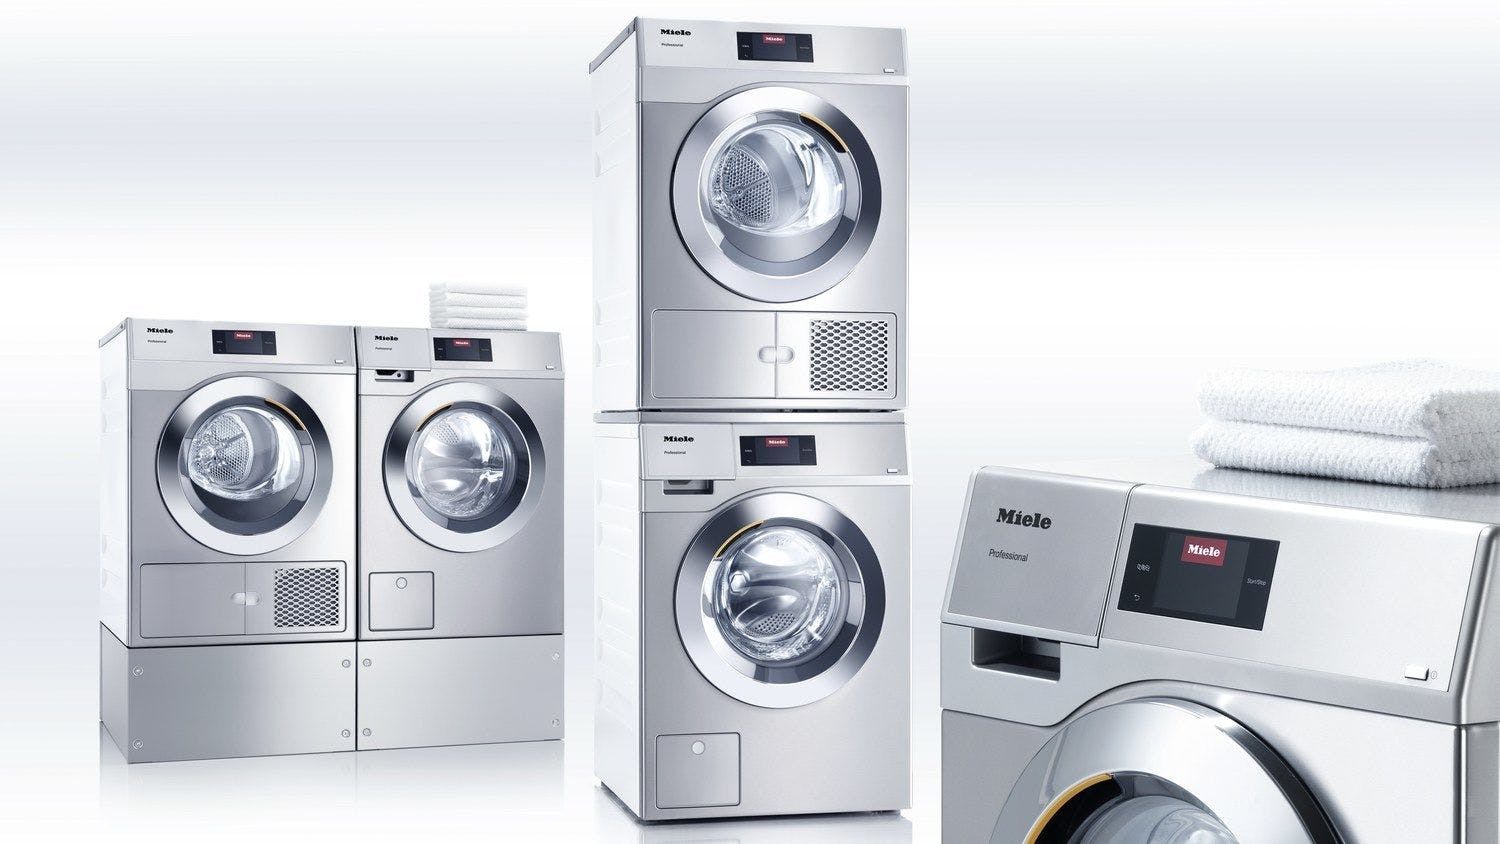 Miele has released new disinfecting washer, dryer units